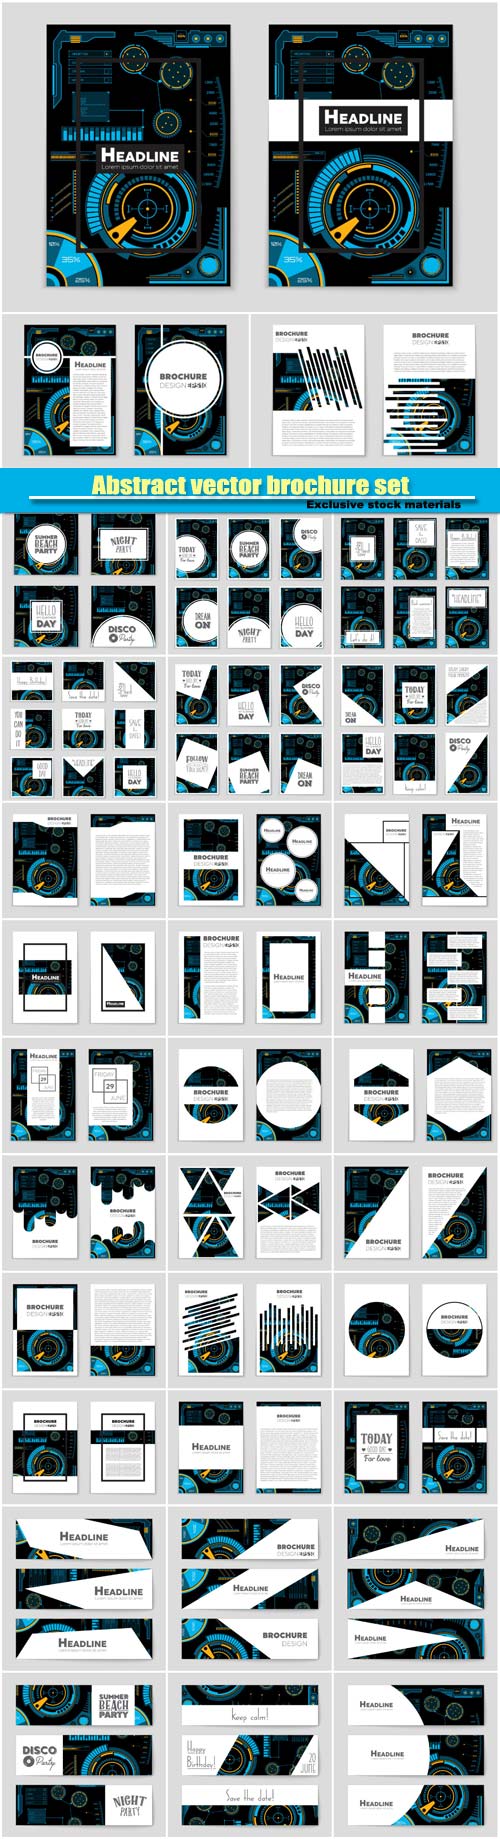 Abstract vector brochure layout background set